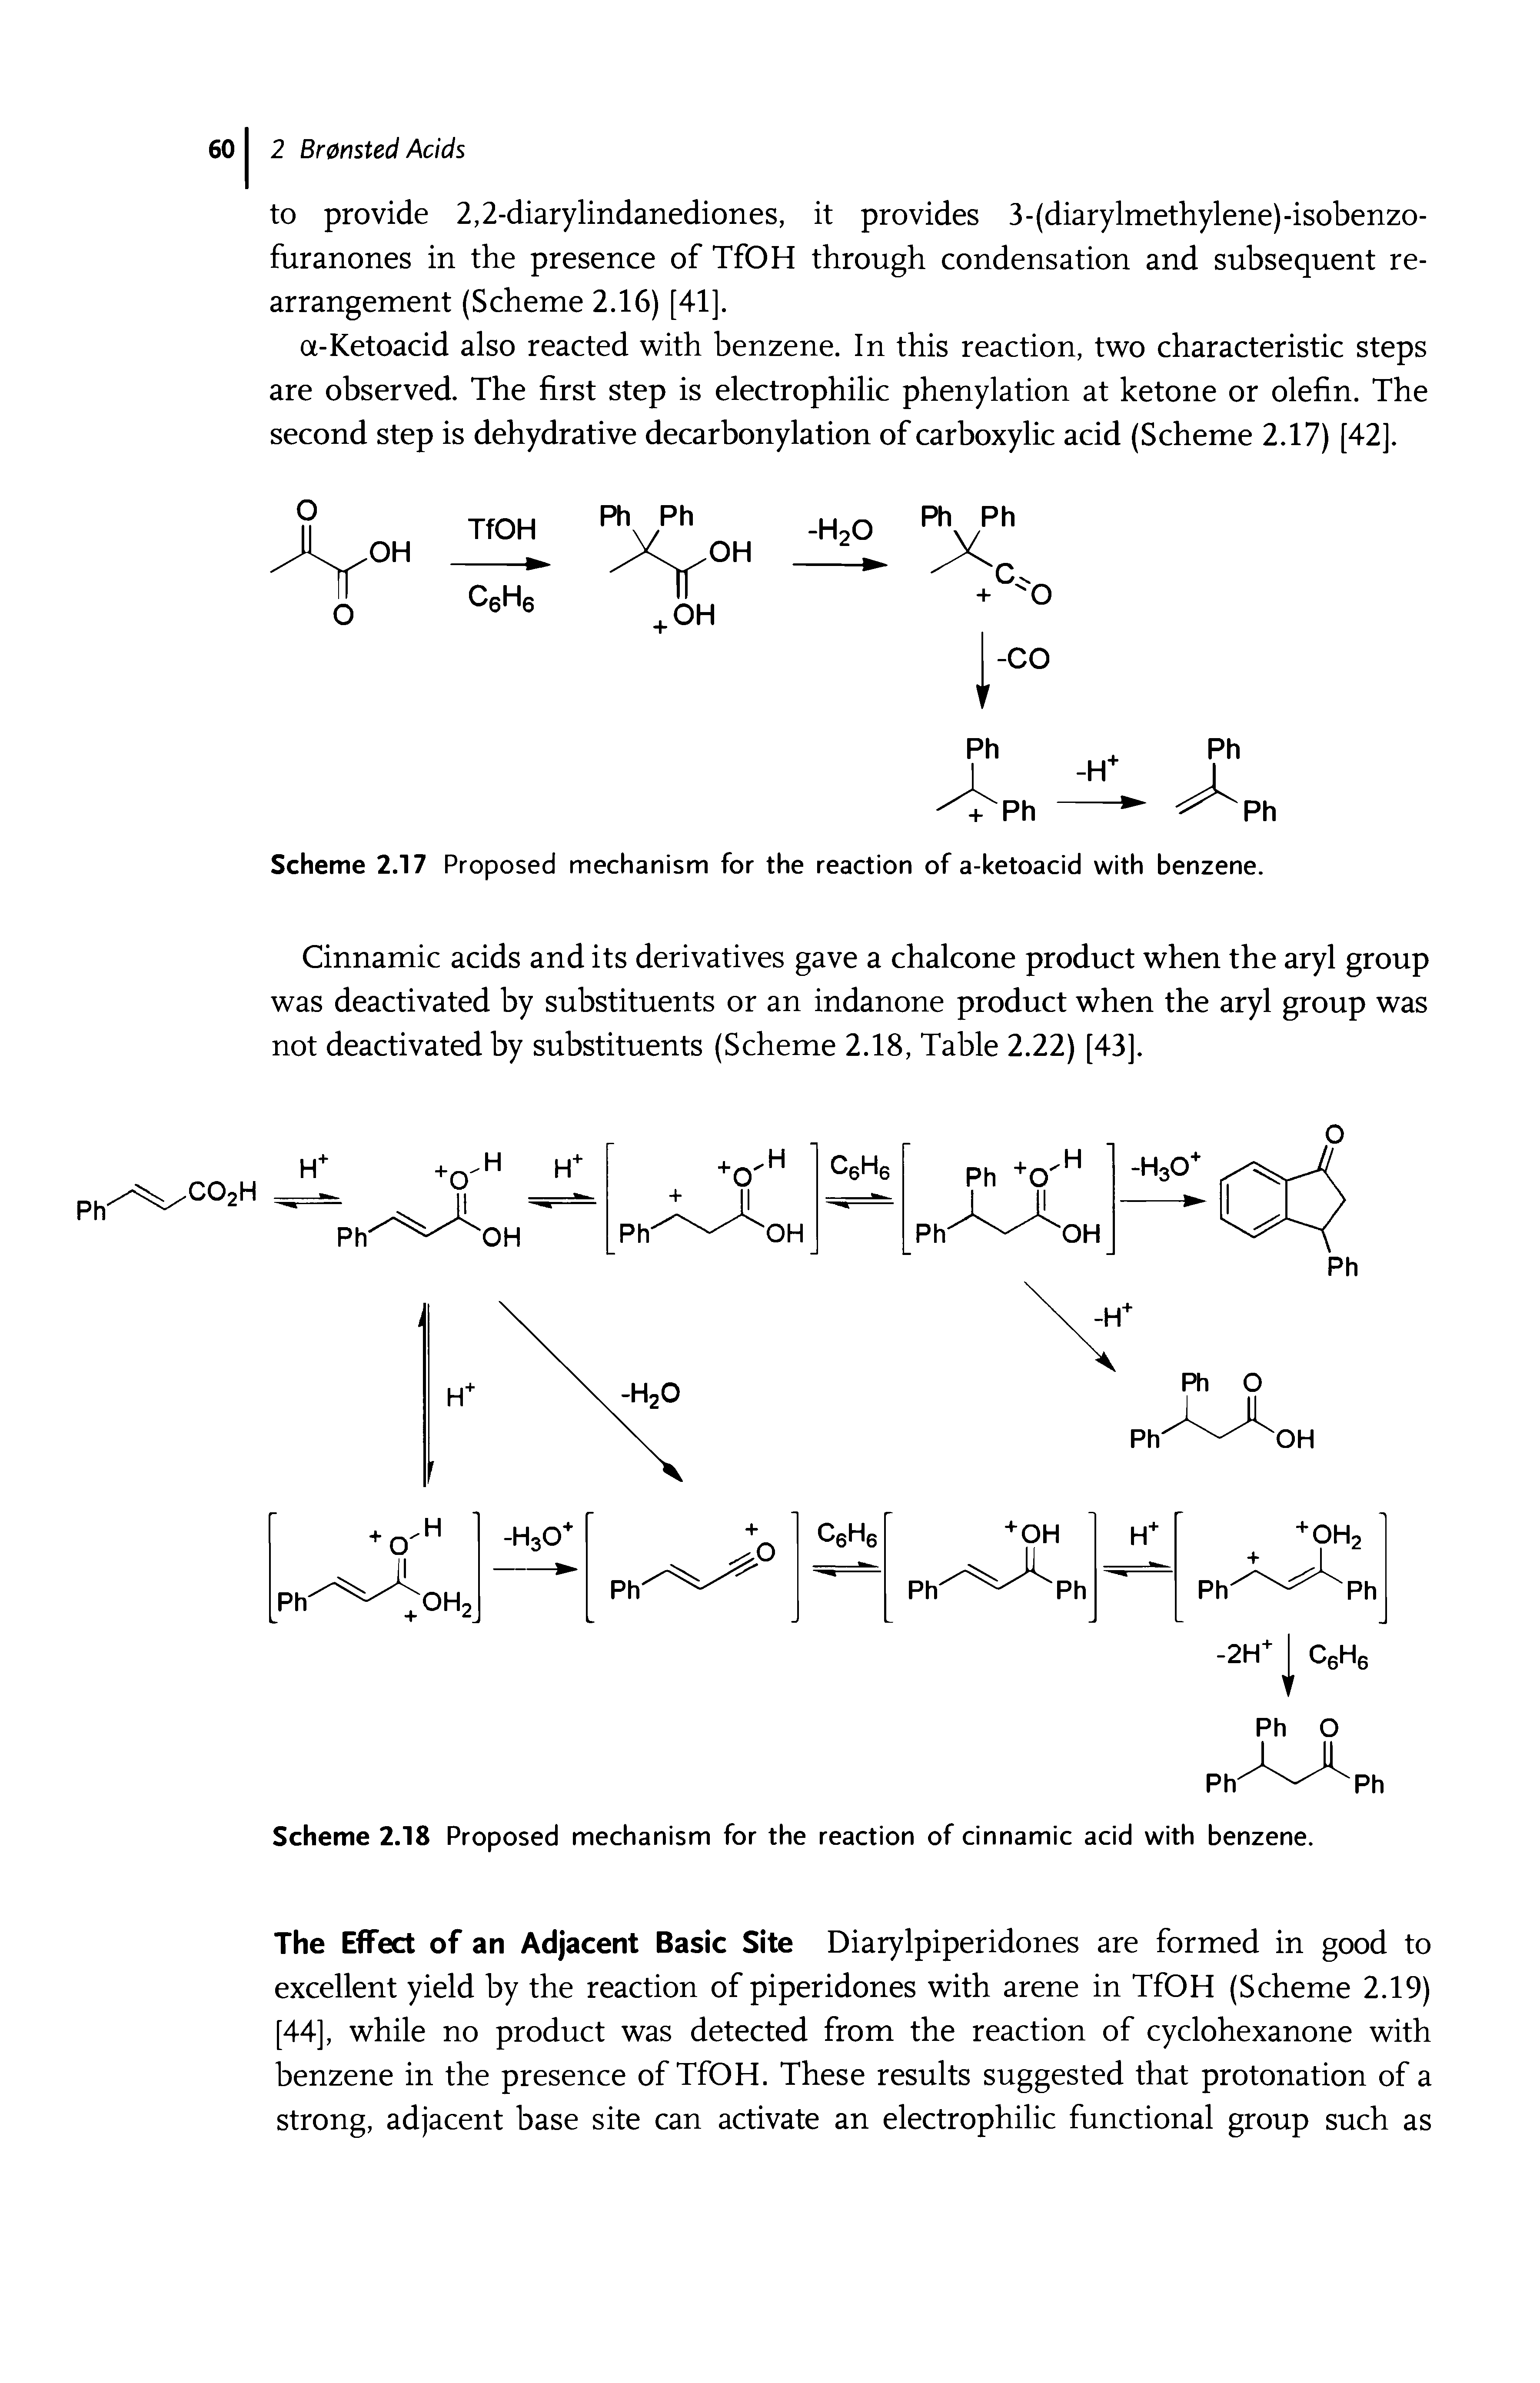 Scheme 2.18 Proposed mechanism for the reaction of cinnamic acid with benzene.